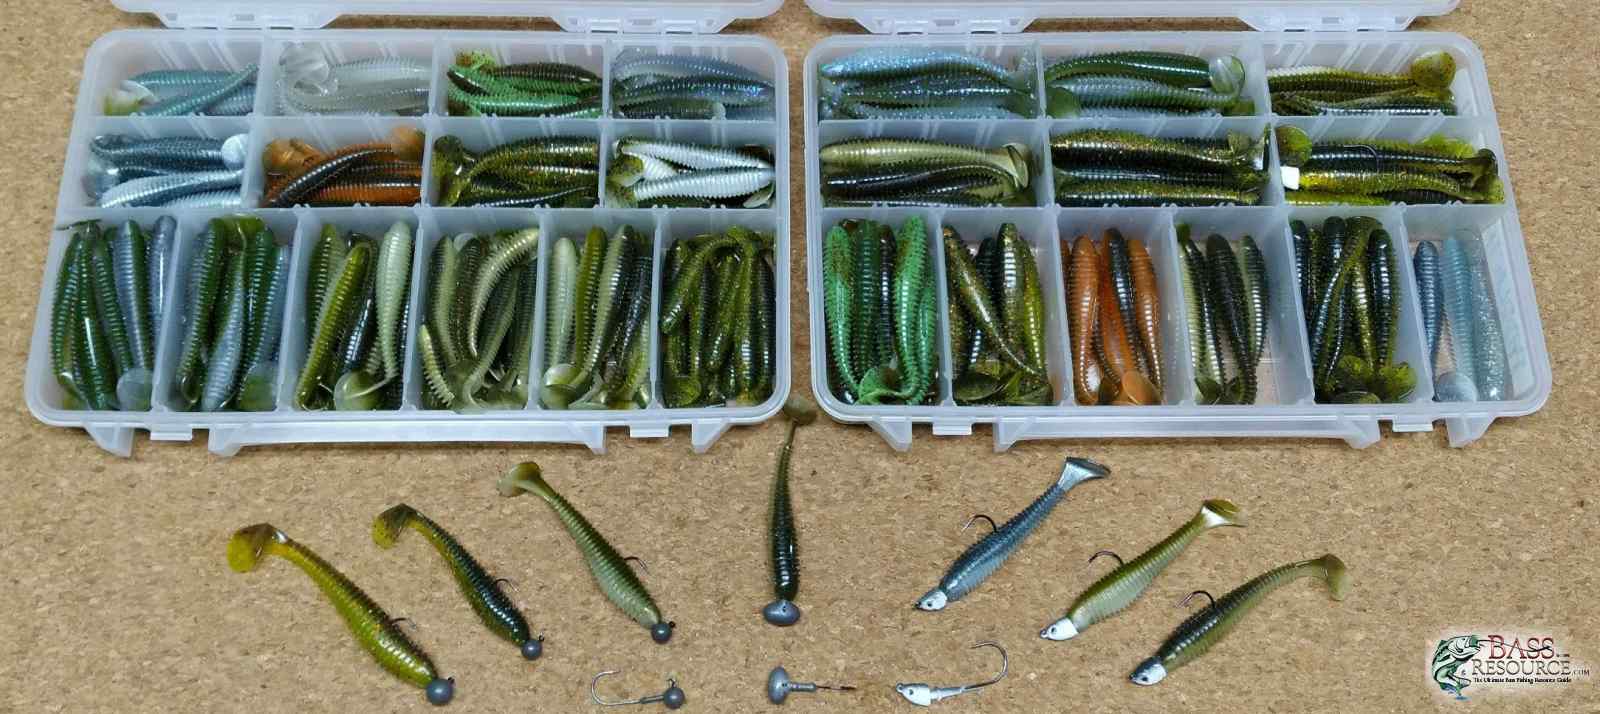 For keitech user out therelooking for somes good jig head - Fishing  Tackle - Bass Fishing Forums